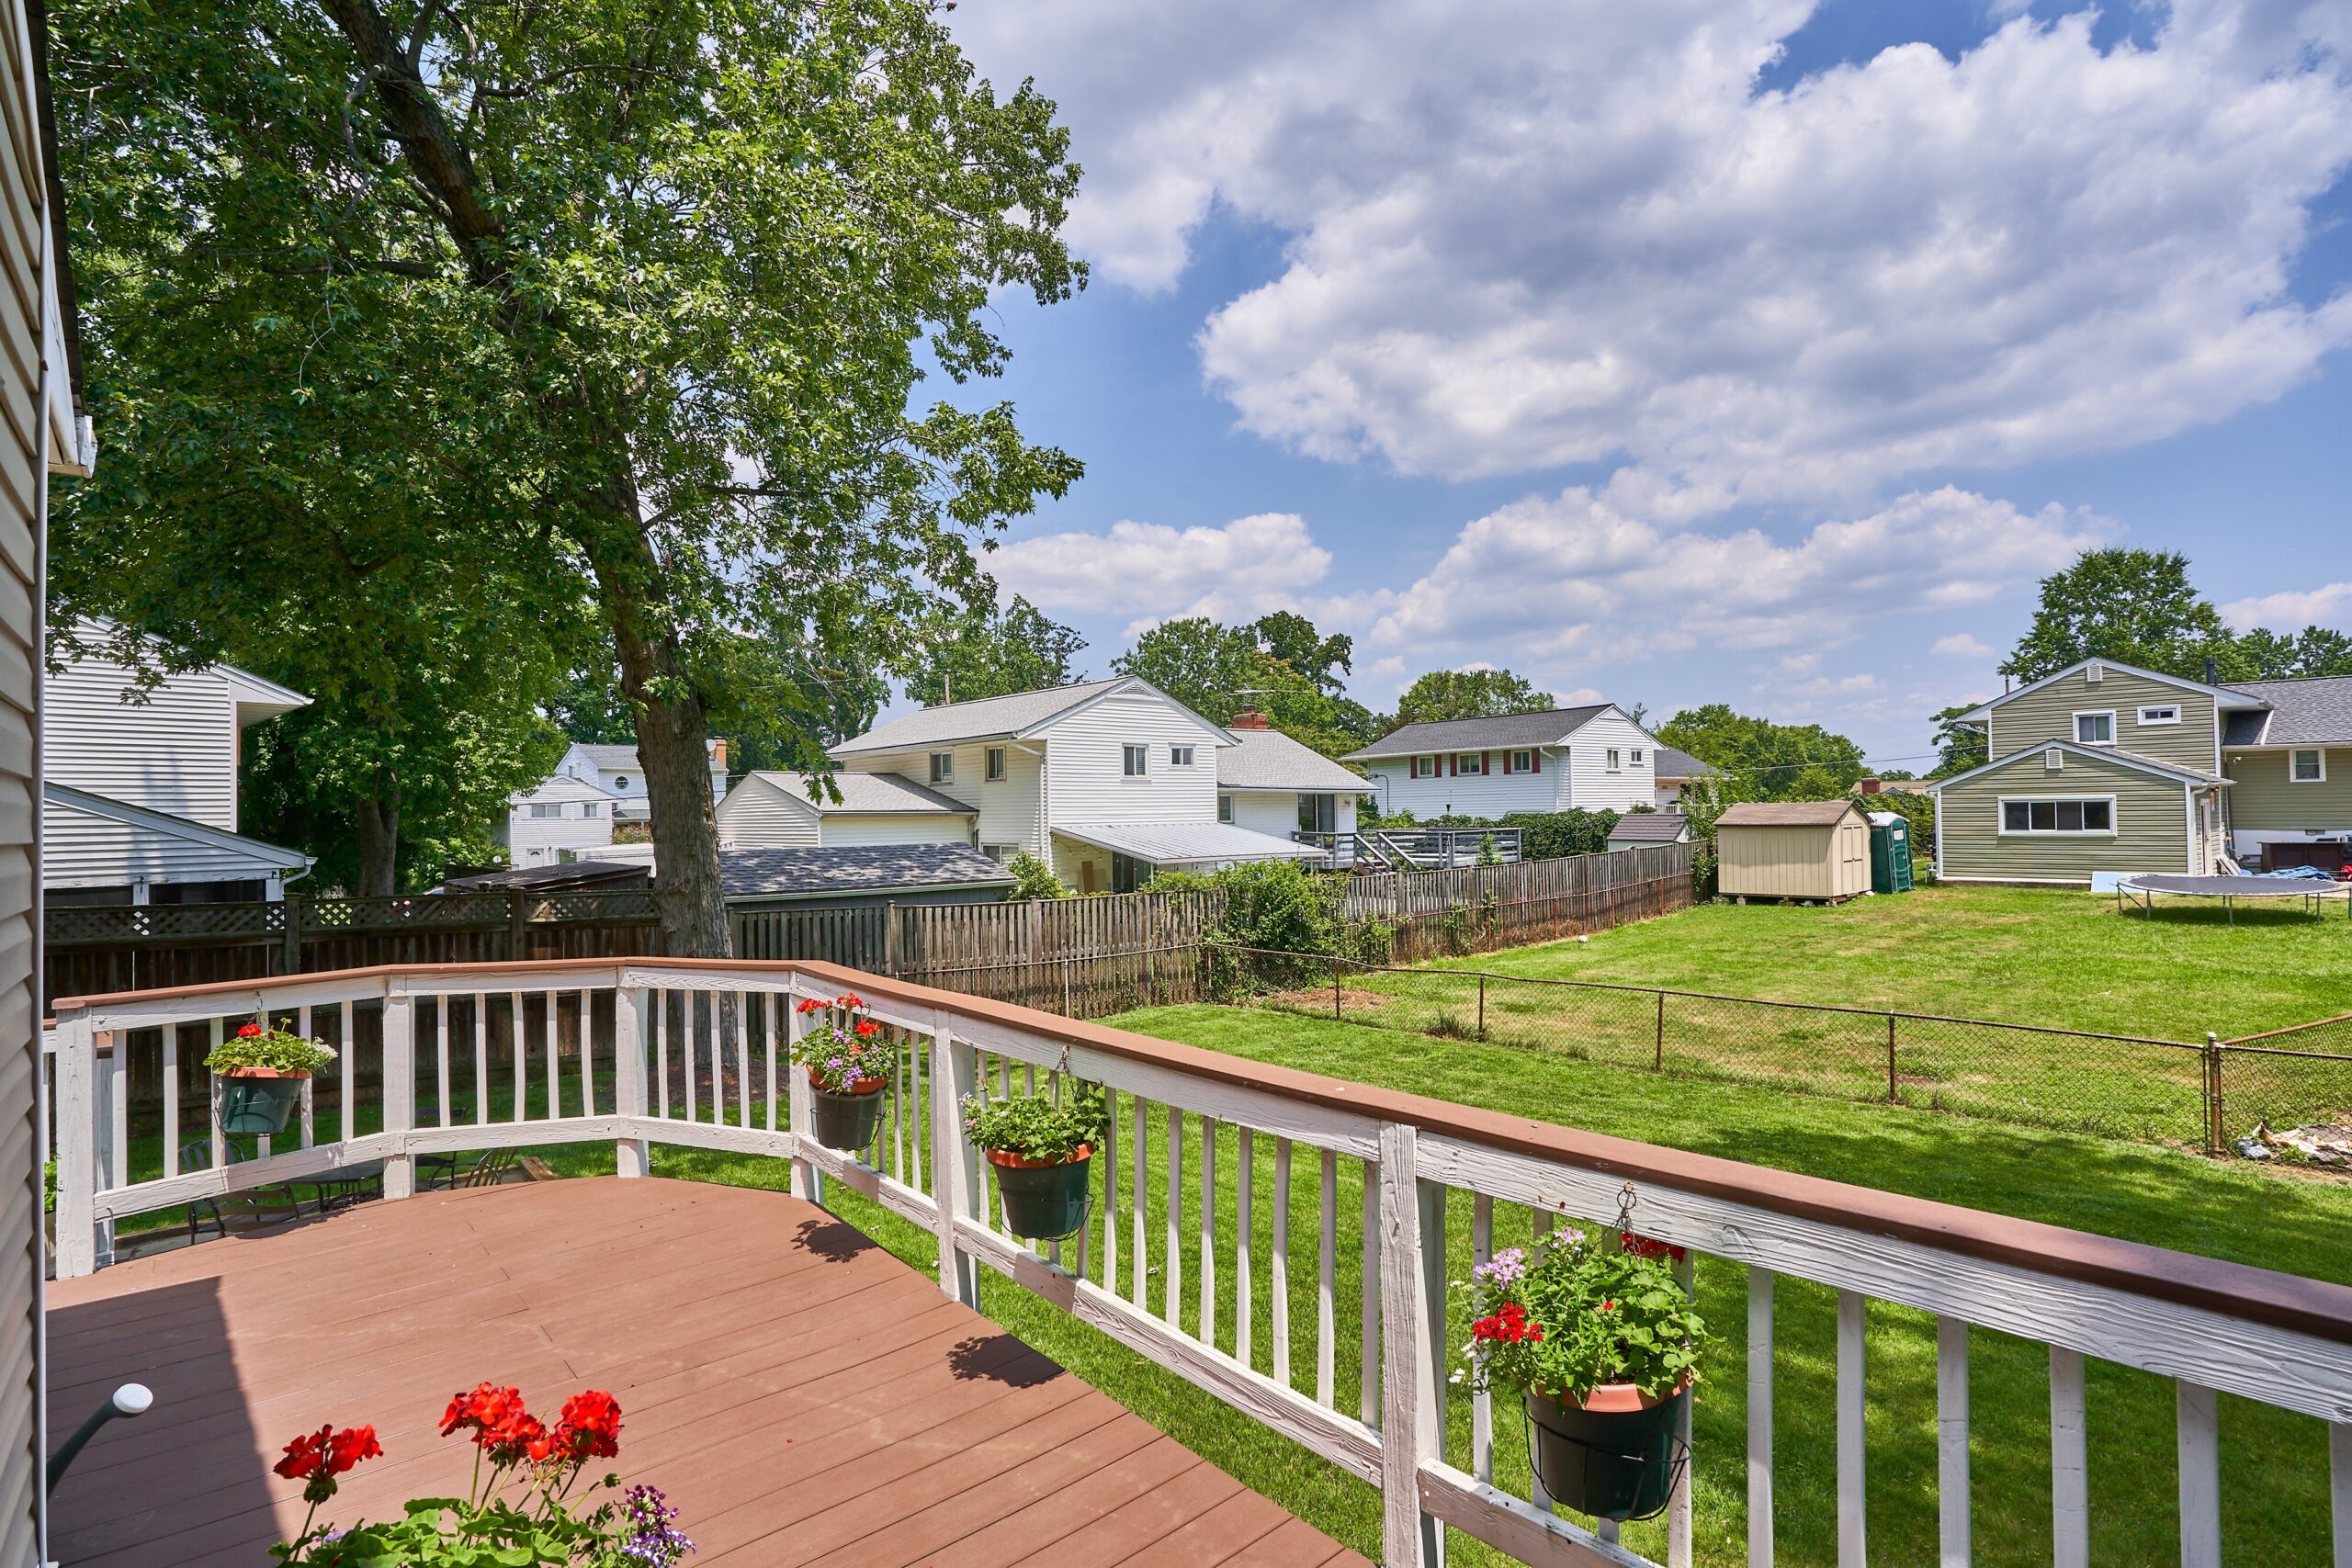 Professional exterior photo of 5803 Sable Drive, Alexandria, VA - showing the view of and from the rear deck over the flat, fully fenced backyard